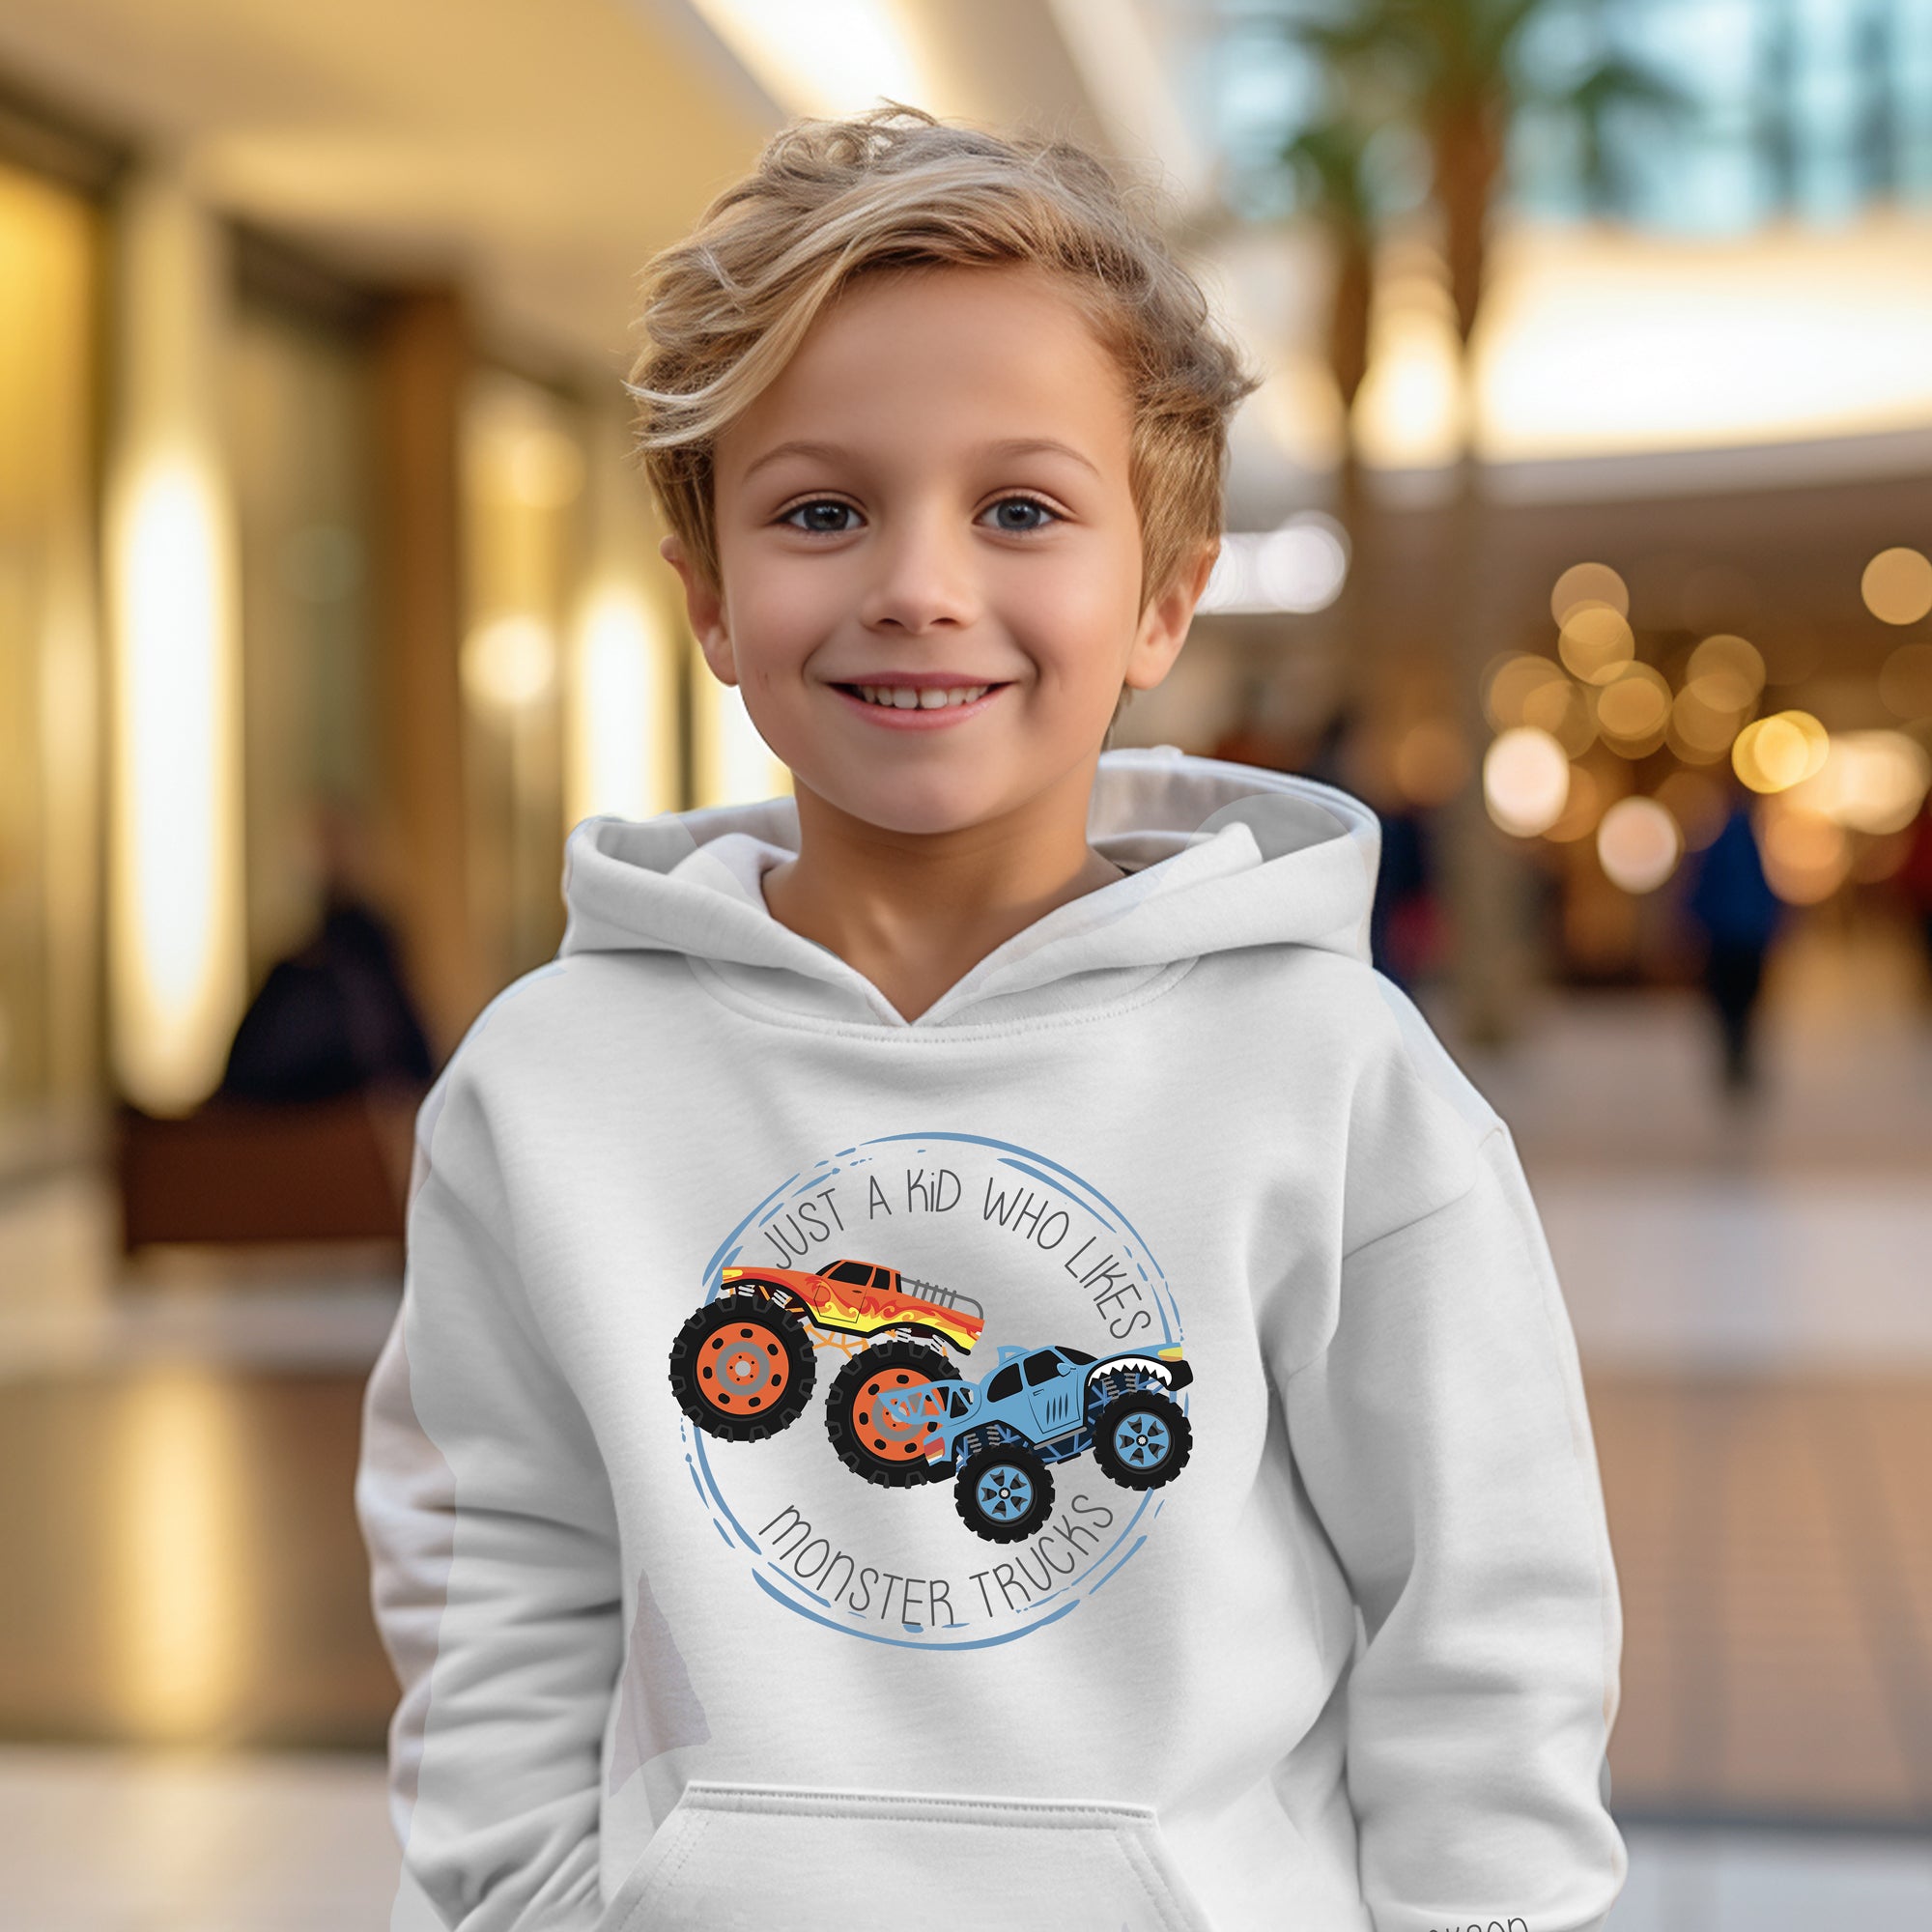 Just a Kid who likes MONSTER TRUCKS - Personalized Apparel